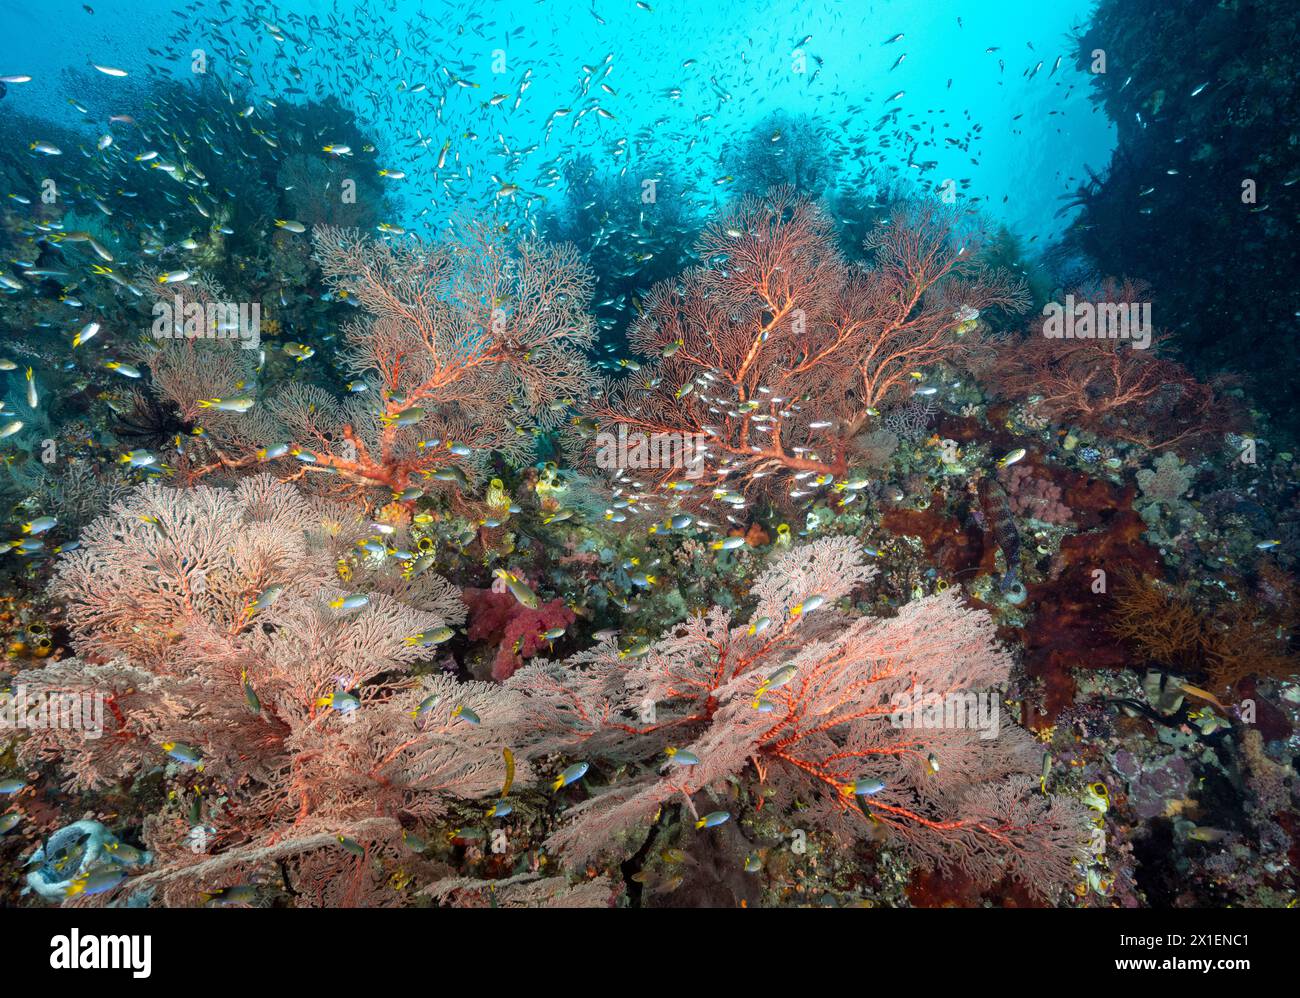 Colorful reef scenic with giant sea fans and with yellowtail damsel fishes, Neopomacentrus azysron, Raja Ampat Indonesia. Stock Photo